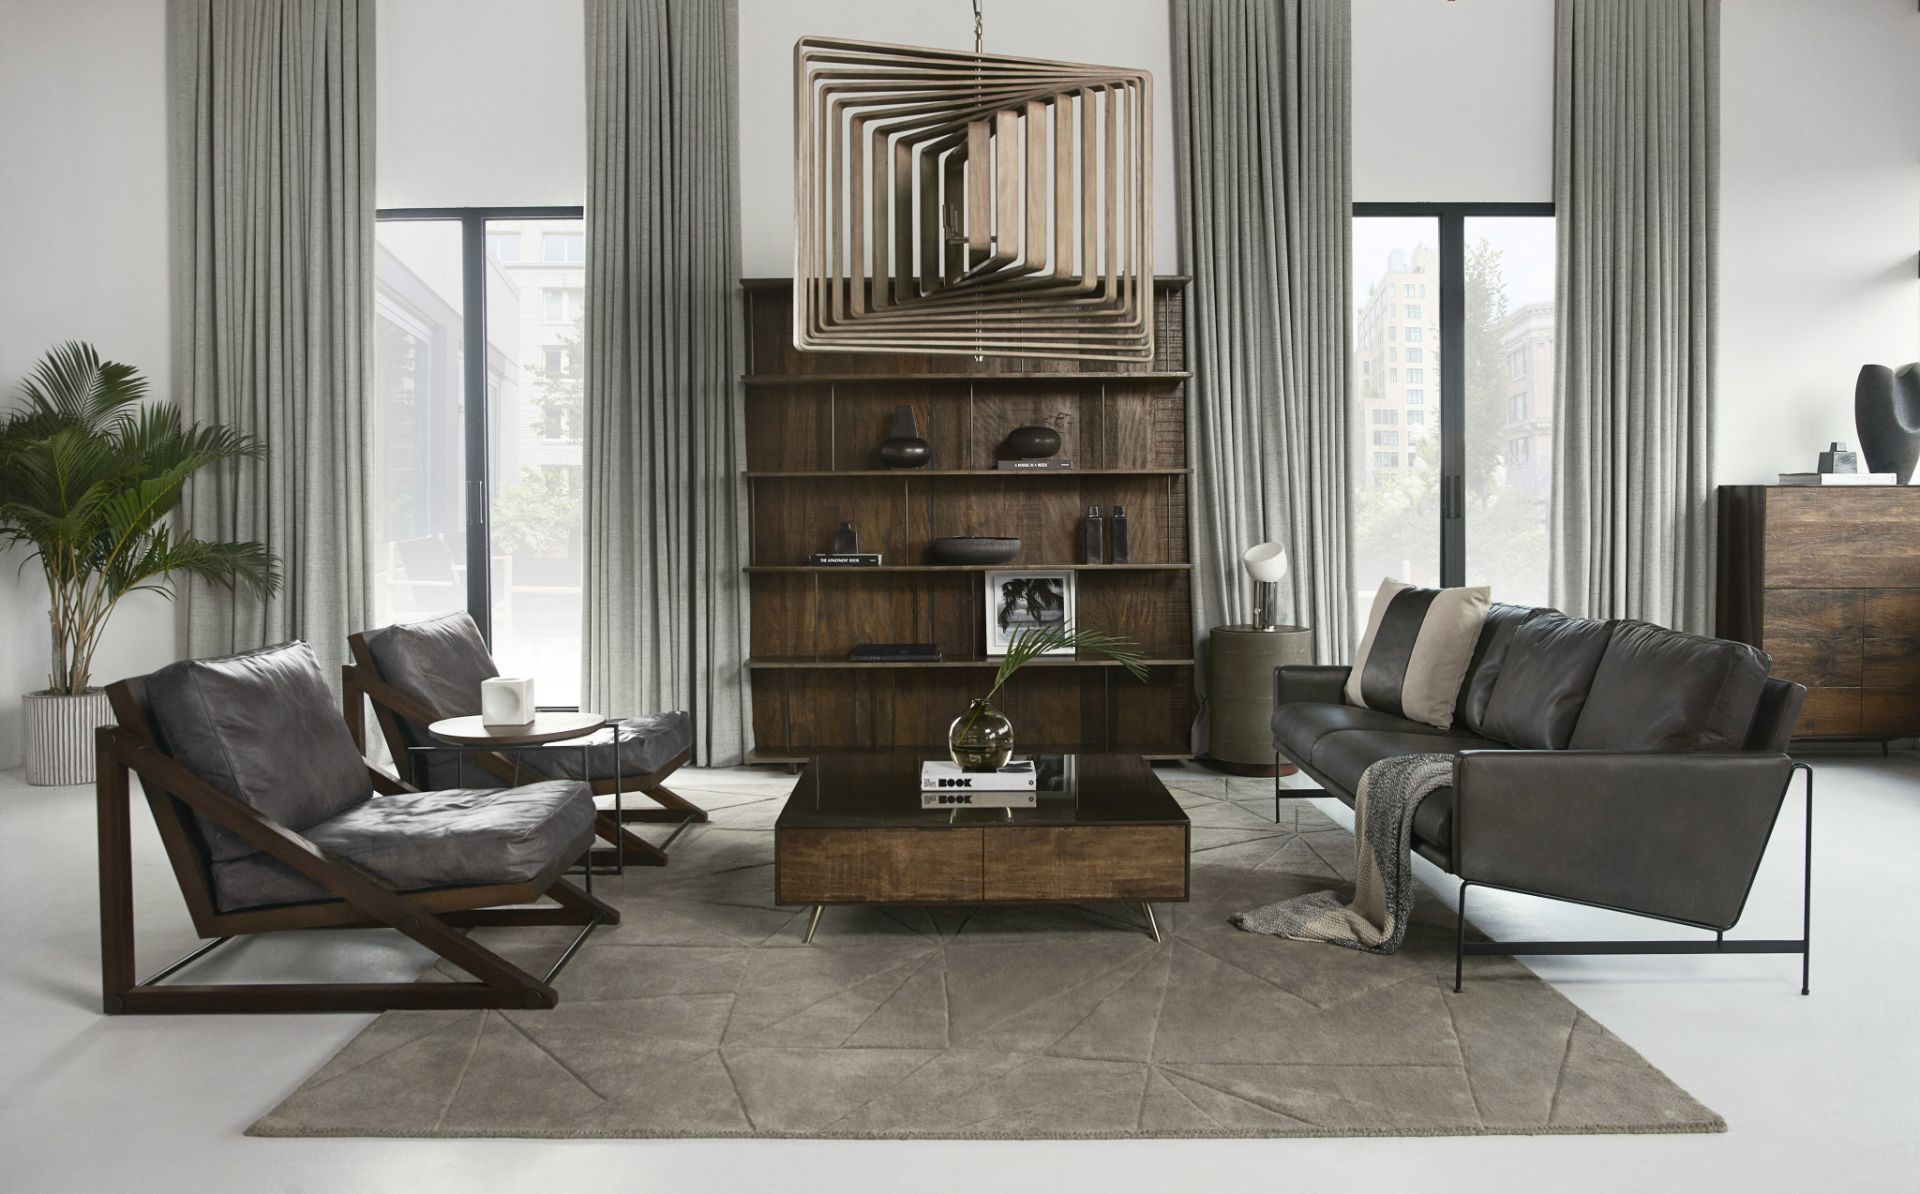 1 x Sonder Living 10-Layer Spiral Walnut Light Sculpture by Nellcote Studio - New Boxed Stock - Ref: - Image 6 of 7